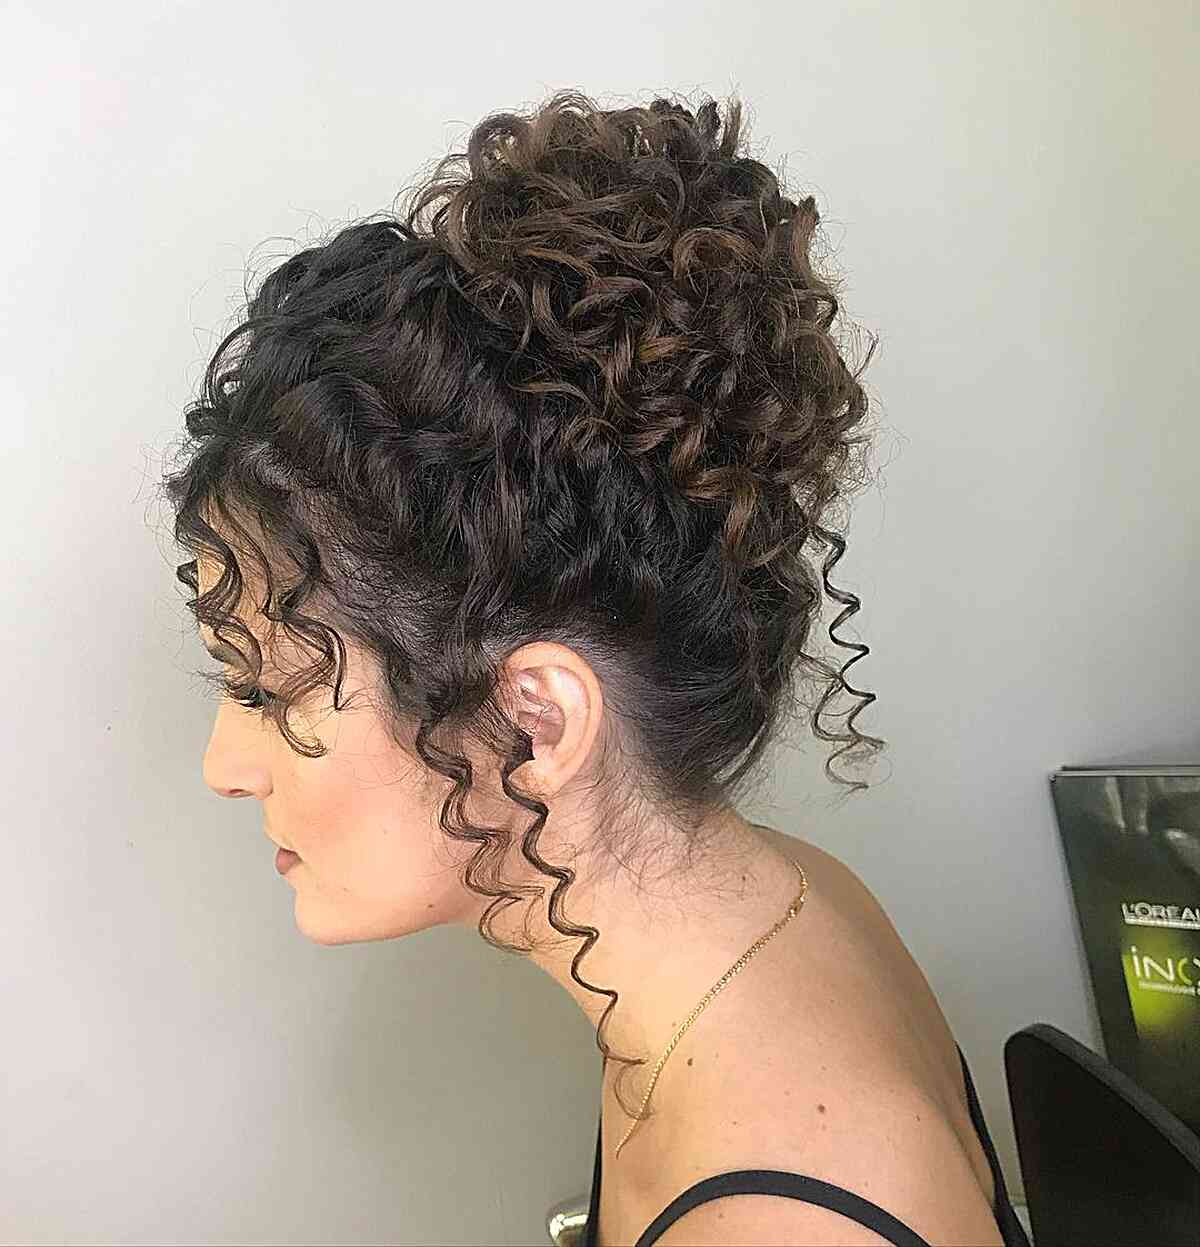 High Chignon with Defined Curls and tendrils for prom night